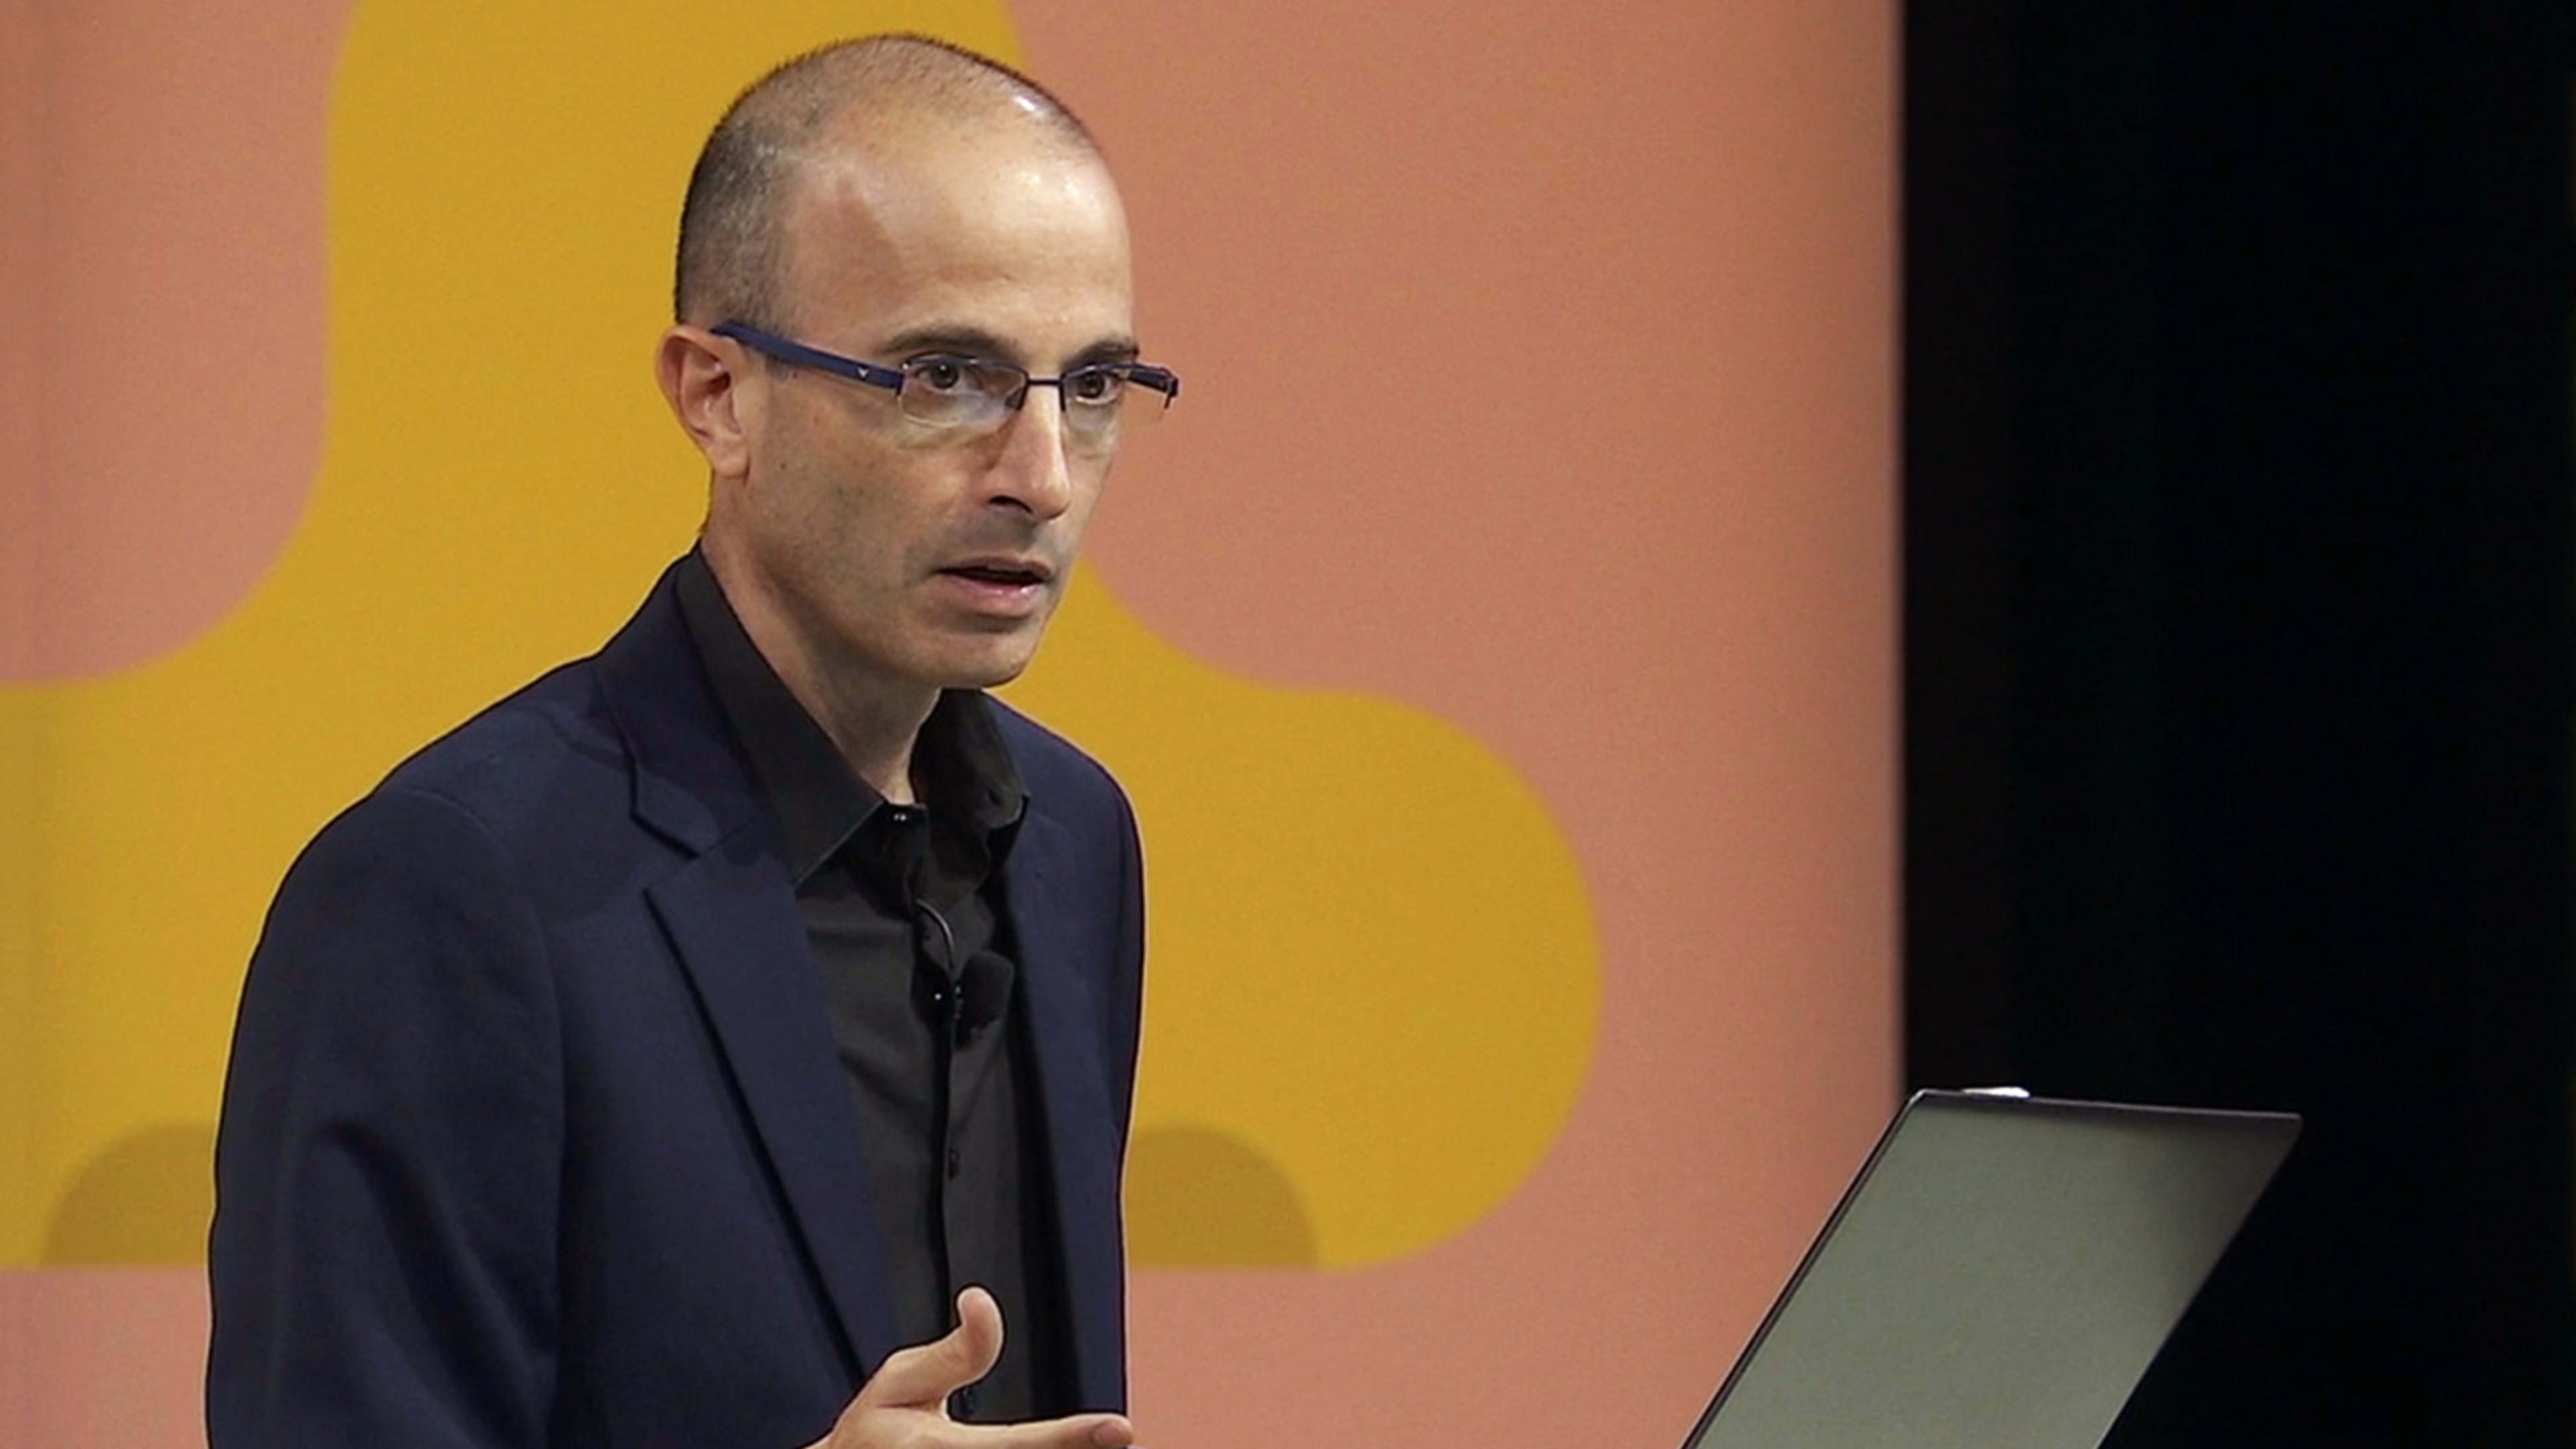 Exclusive video: Yuval Harari on social inequality and the naivete of tech CEOs